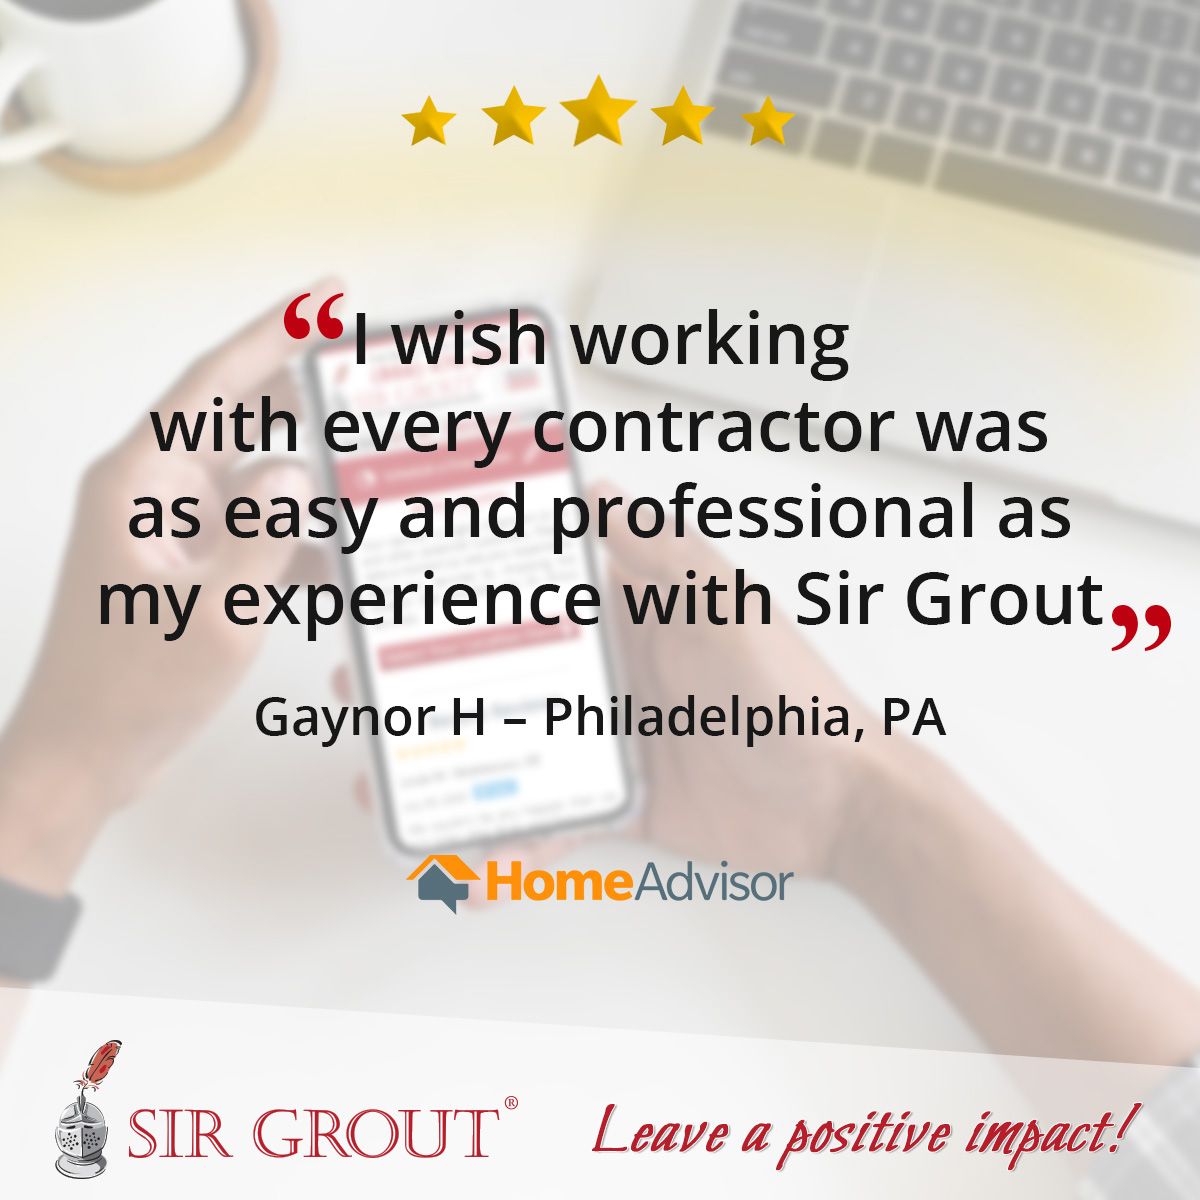 I wish working with every contractor was as easy and professional as my experience with Sir Grout